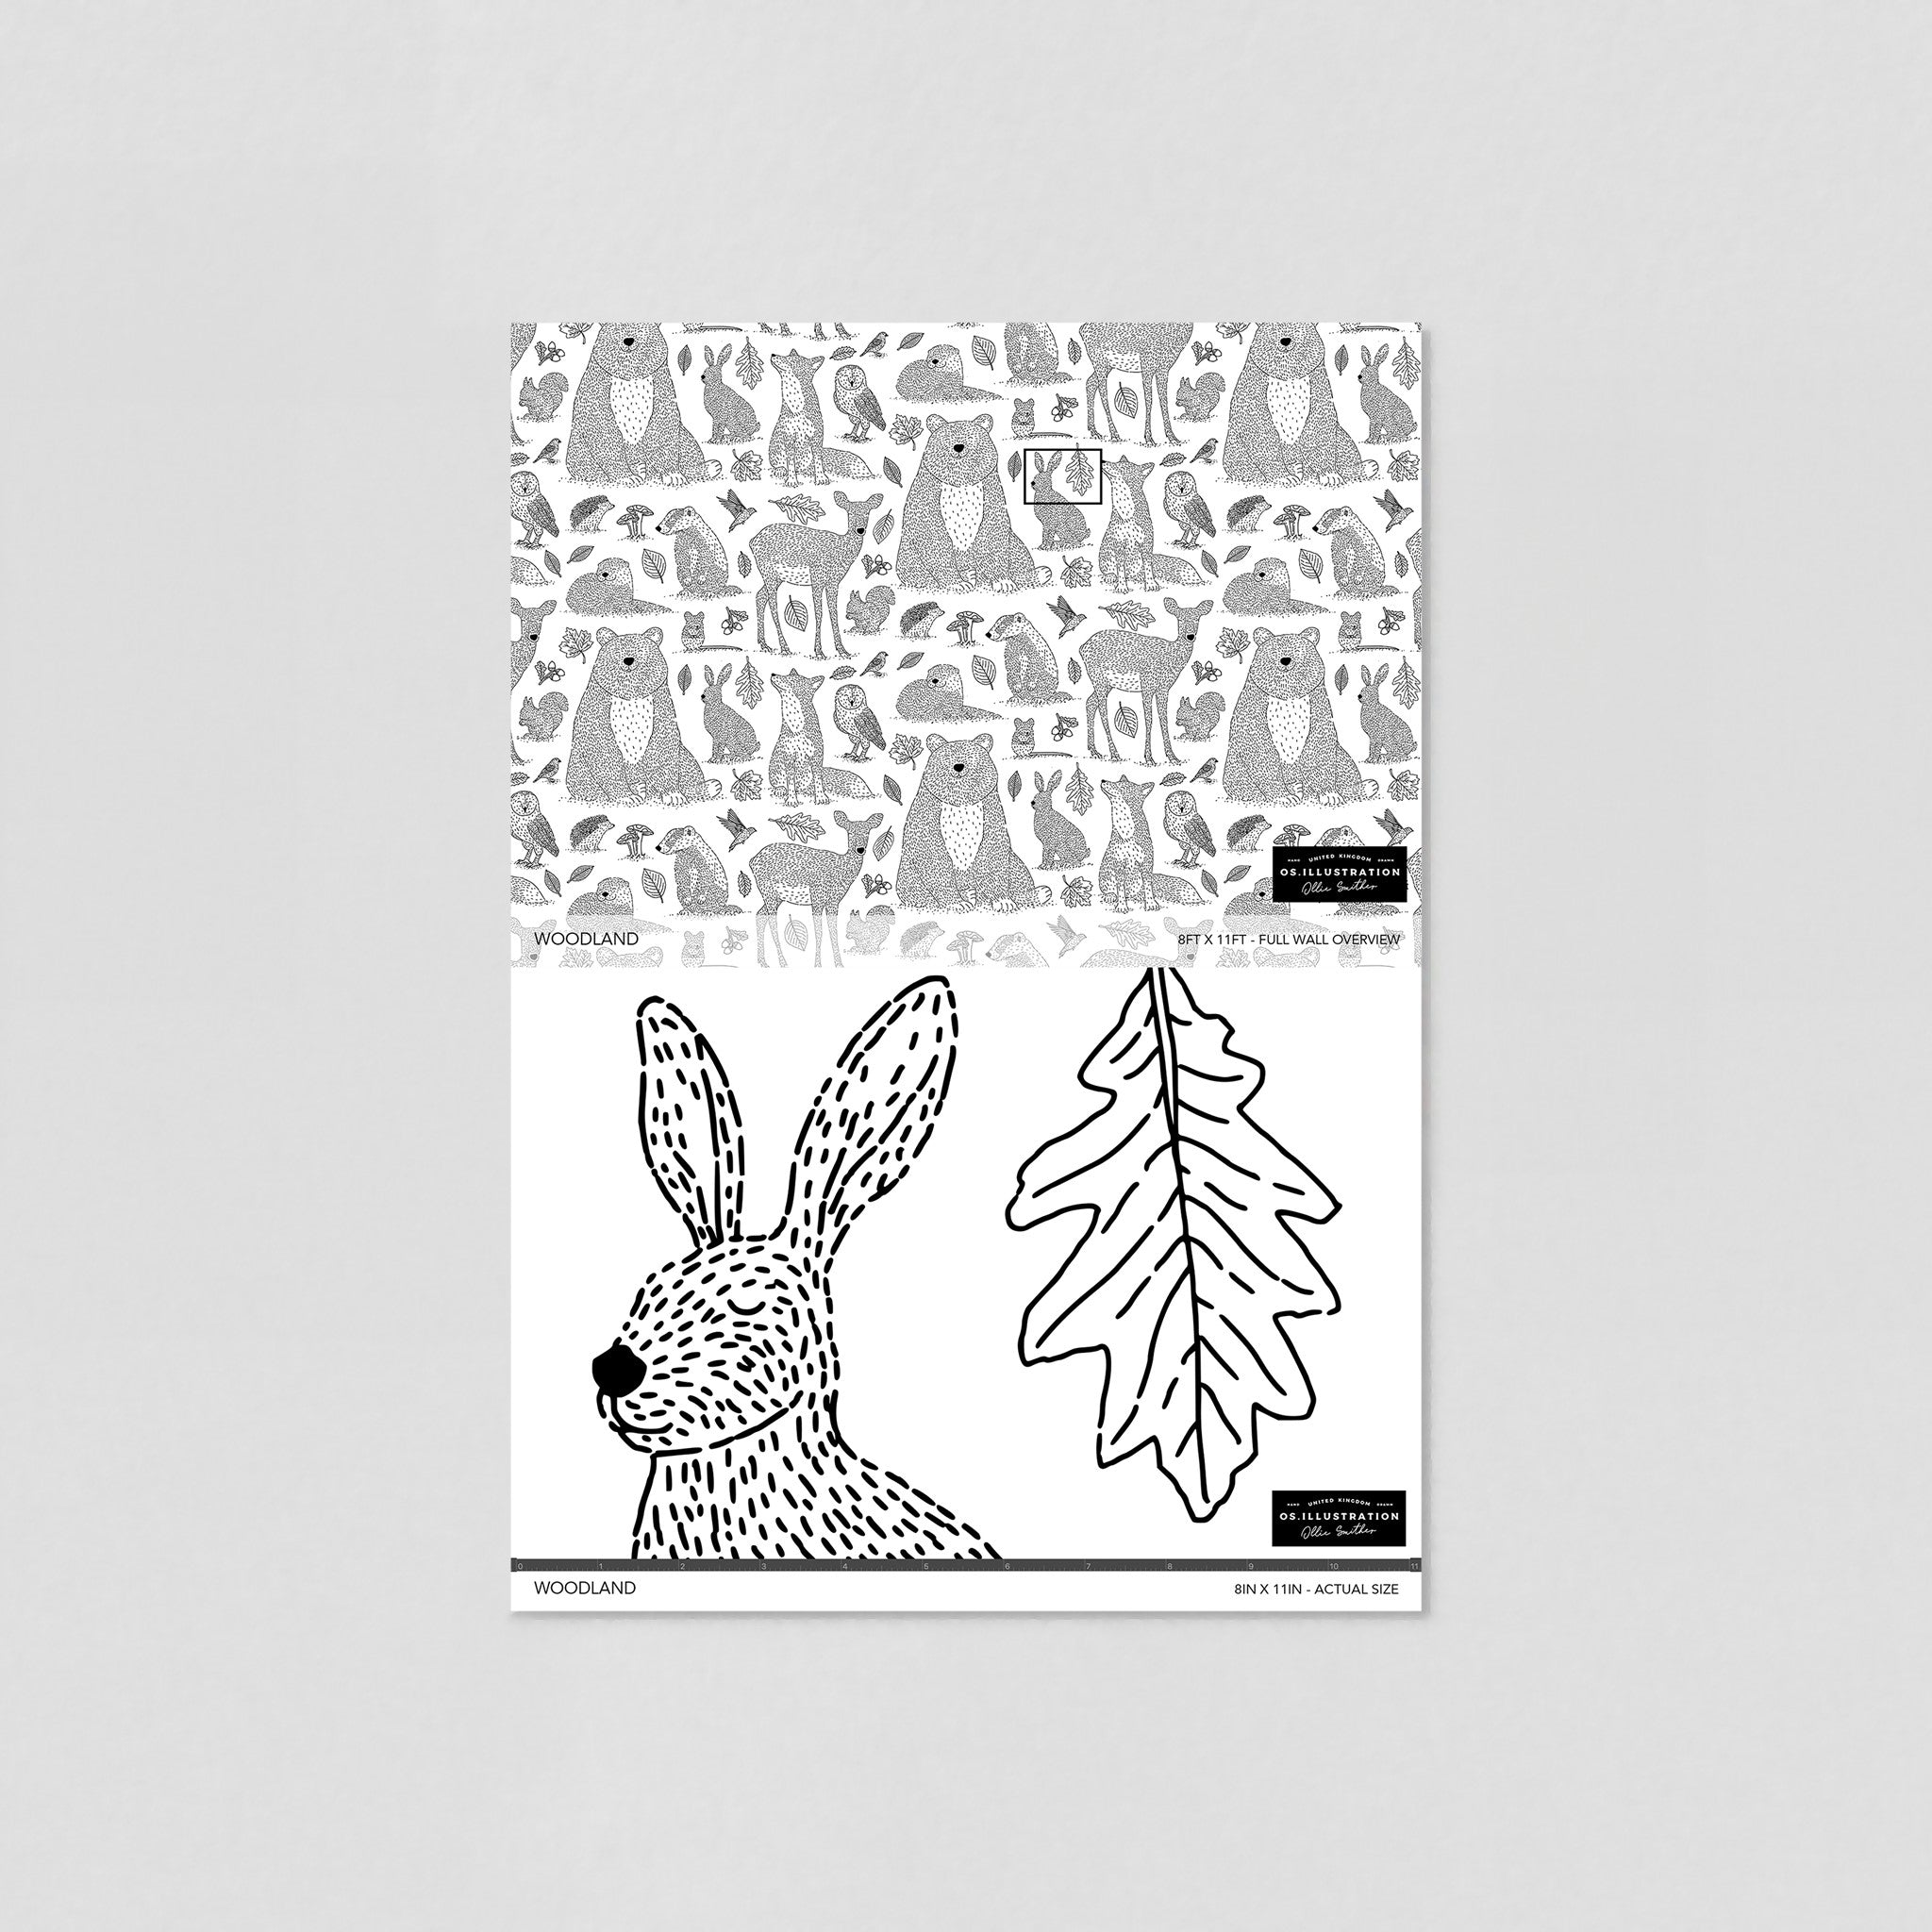 "Wall Blush Woodland Wallpaper sample with animal illustrations in a neutral nursery room, highlighting the texture and pattern."

(Note: The image provided doesn't show the wallpaper in a room setting, but for SEO purposes, I've included the type of room that this wallpaper might typically be used in based on the visual clues from the pattern.)